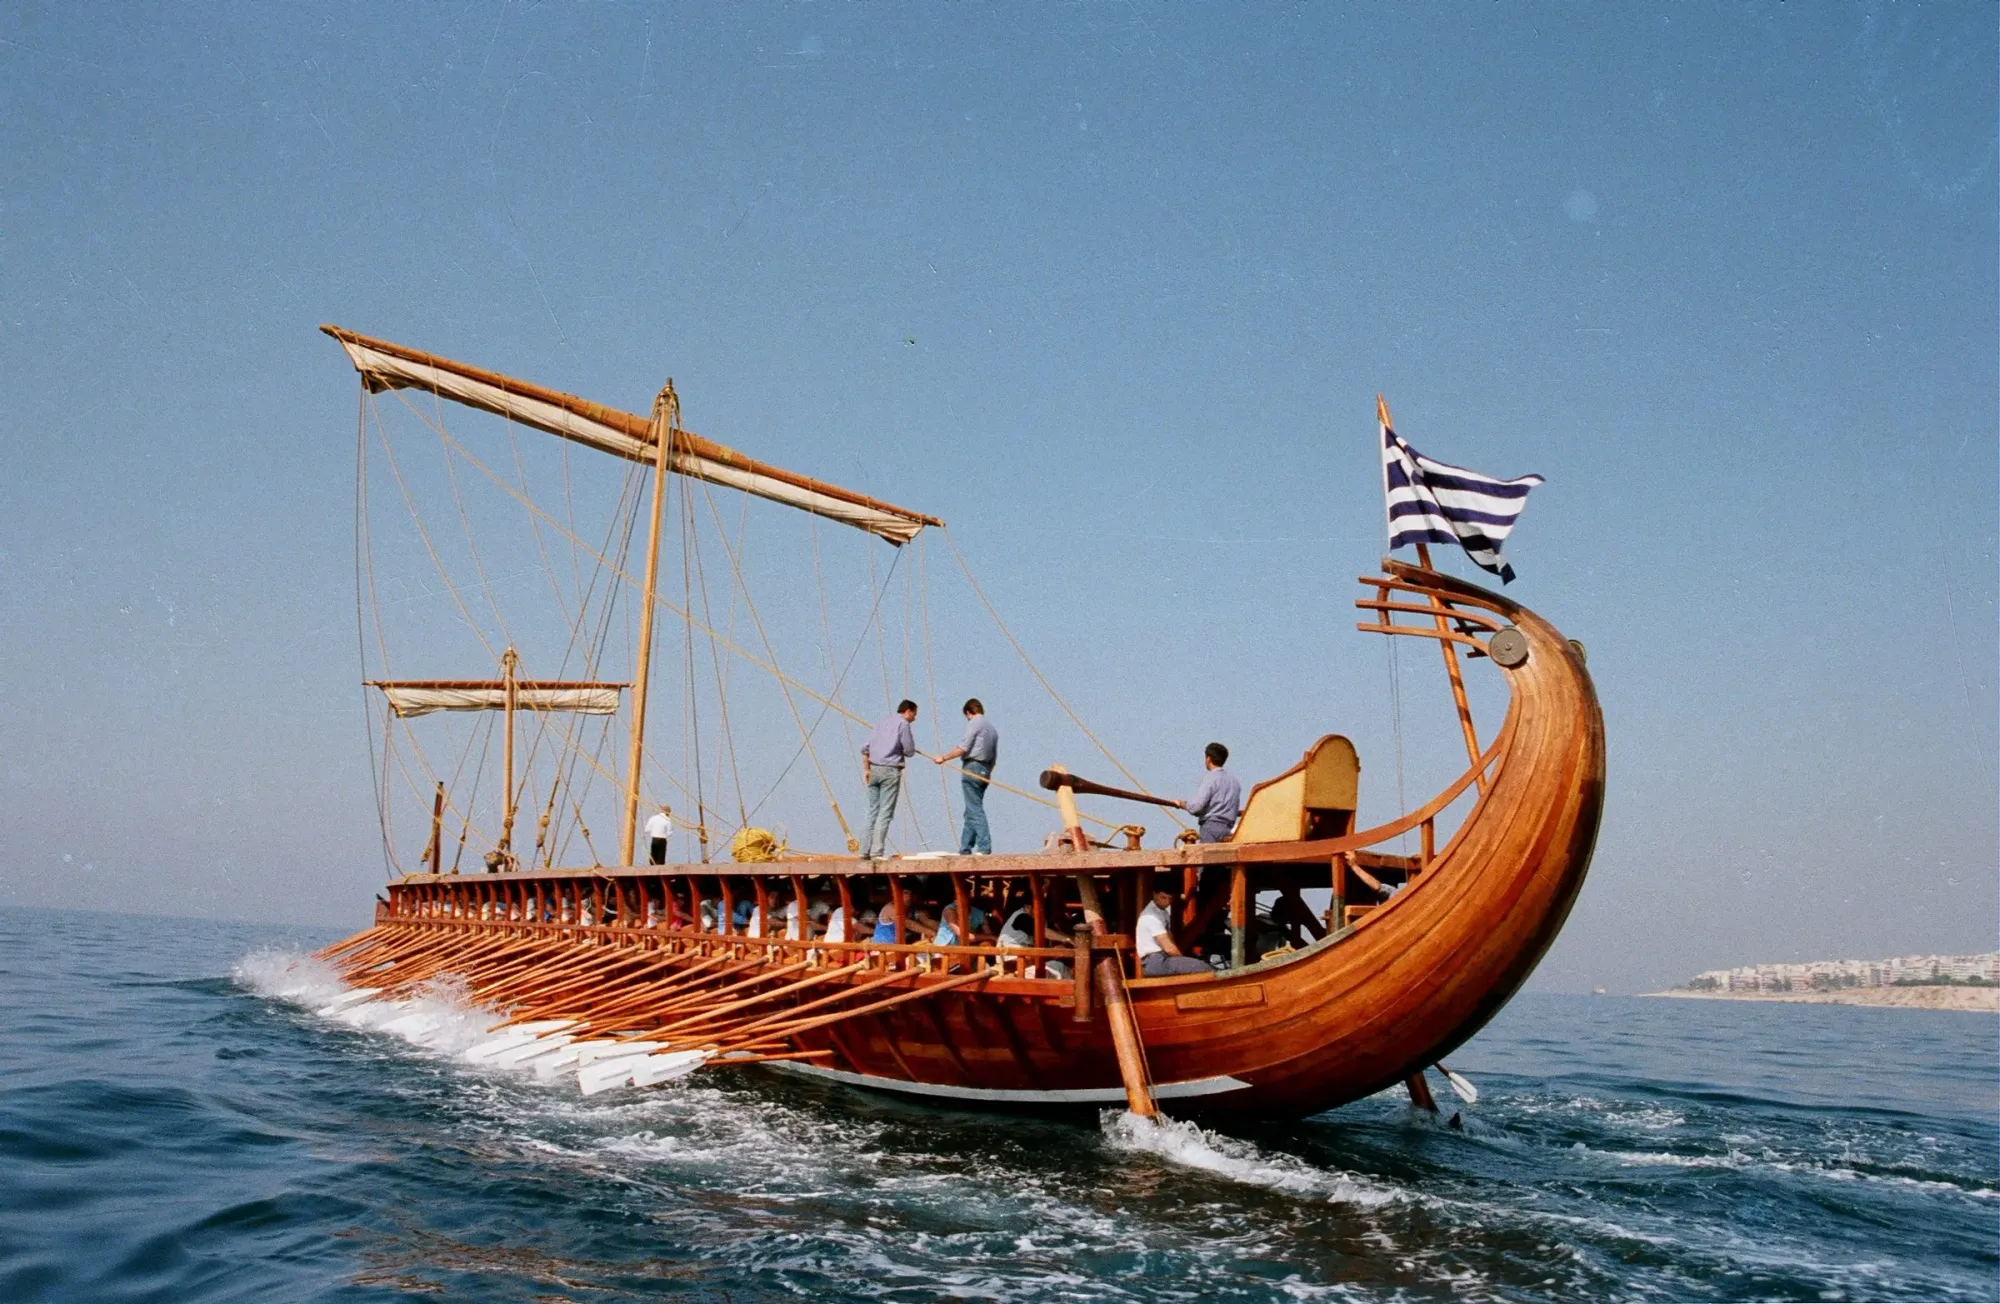 Odysseus Returns from Seven Year Long Journey, Kills Suitors Molesting his Home